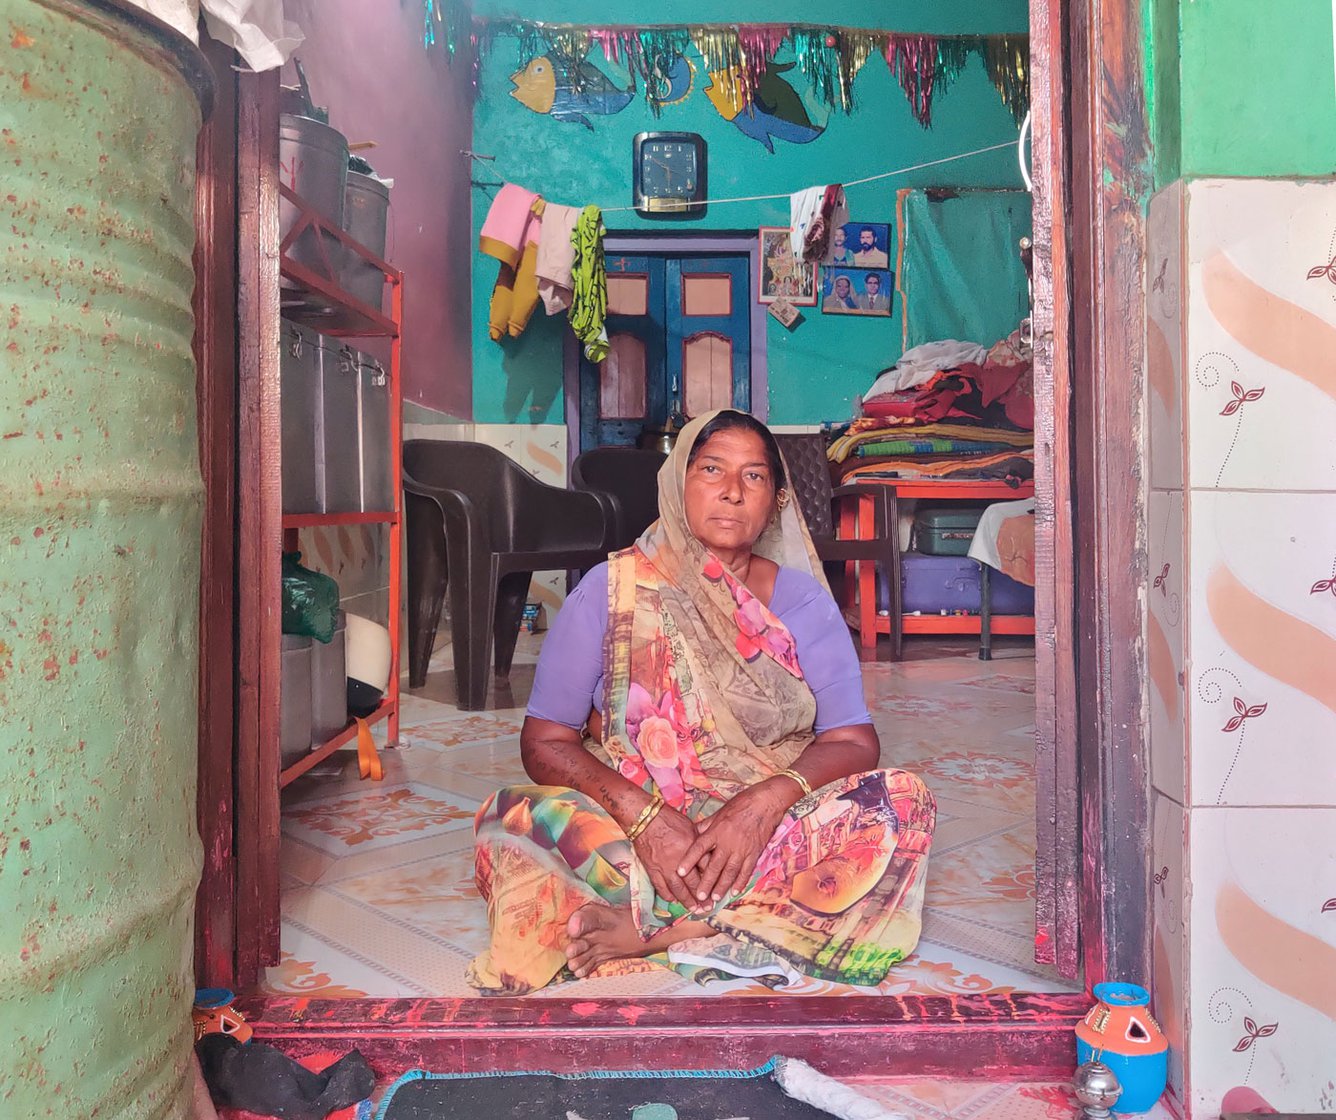 Gabhiben recalls the stress and anxiety she felt every time Jeevanbhai set off to sea after his first heart attack. Most fisherfolk in Gujarat are completely cut off from medical services during time they are at sea